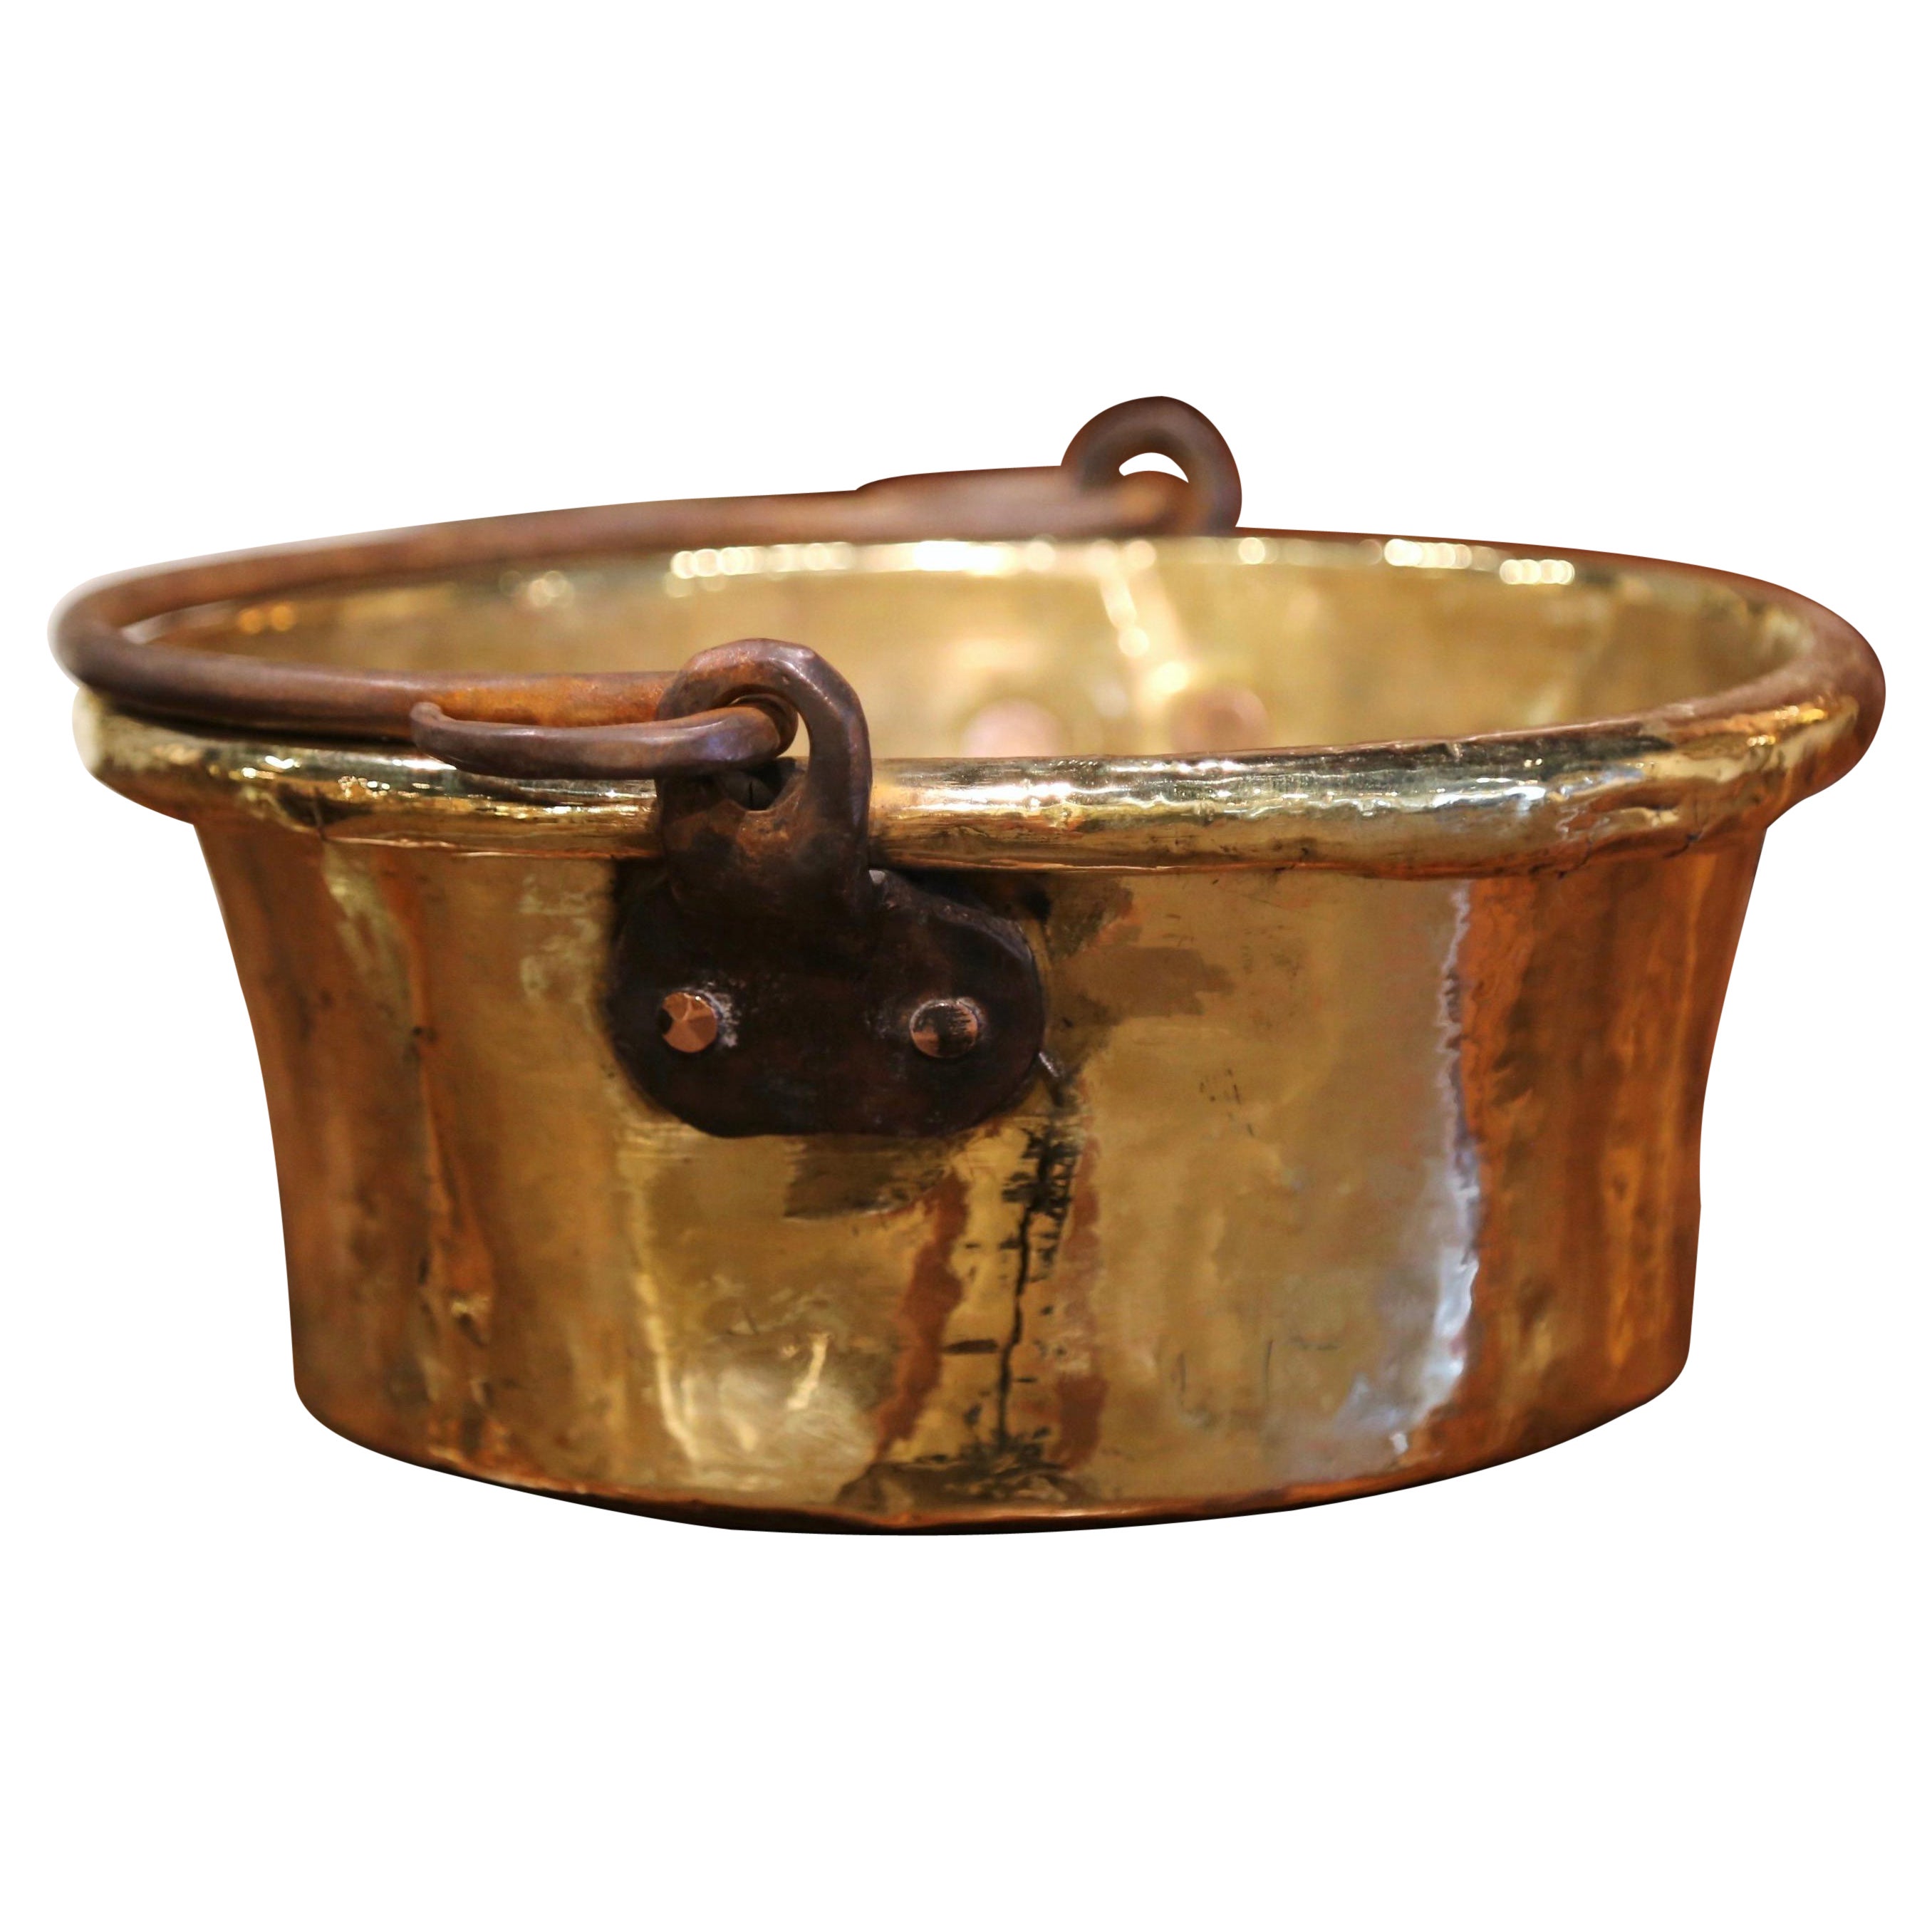 18th Century French Copper Jelly and Jam Boiling Bowl with Forged Iron Handle